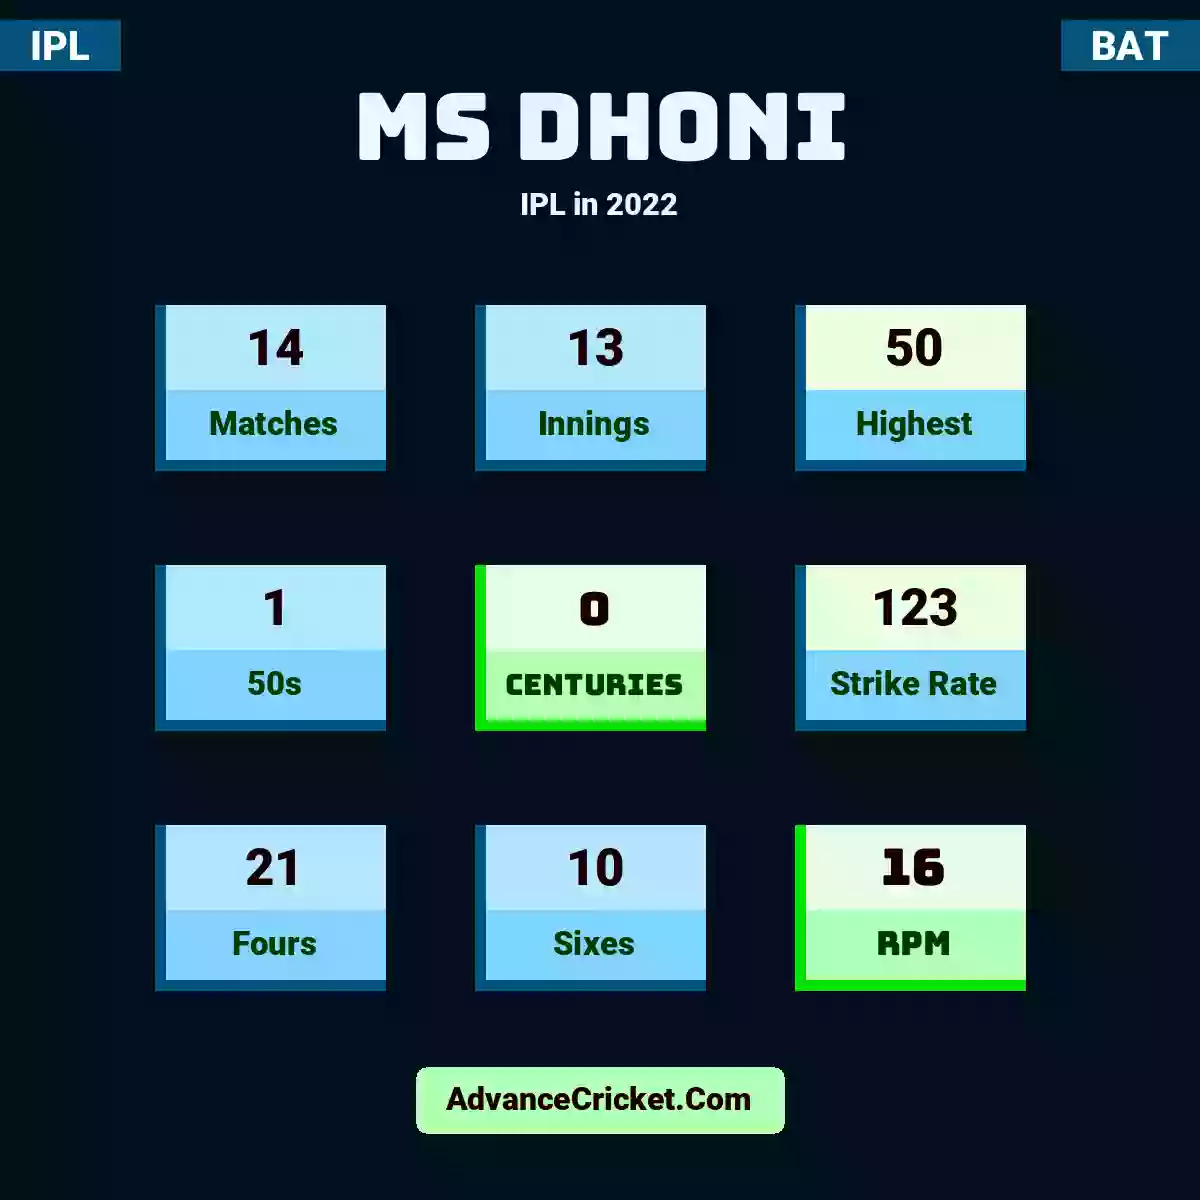 MS Dhoni IPL  in 2022, MS Dhoni played 14 matches, scored 50 runs as highest, 1 half-centuries, and 0 centuries, with a strike rate of 123. M.Dhoni hit 21 fours and 10 sixes, with an RPM of 16.